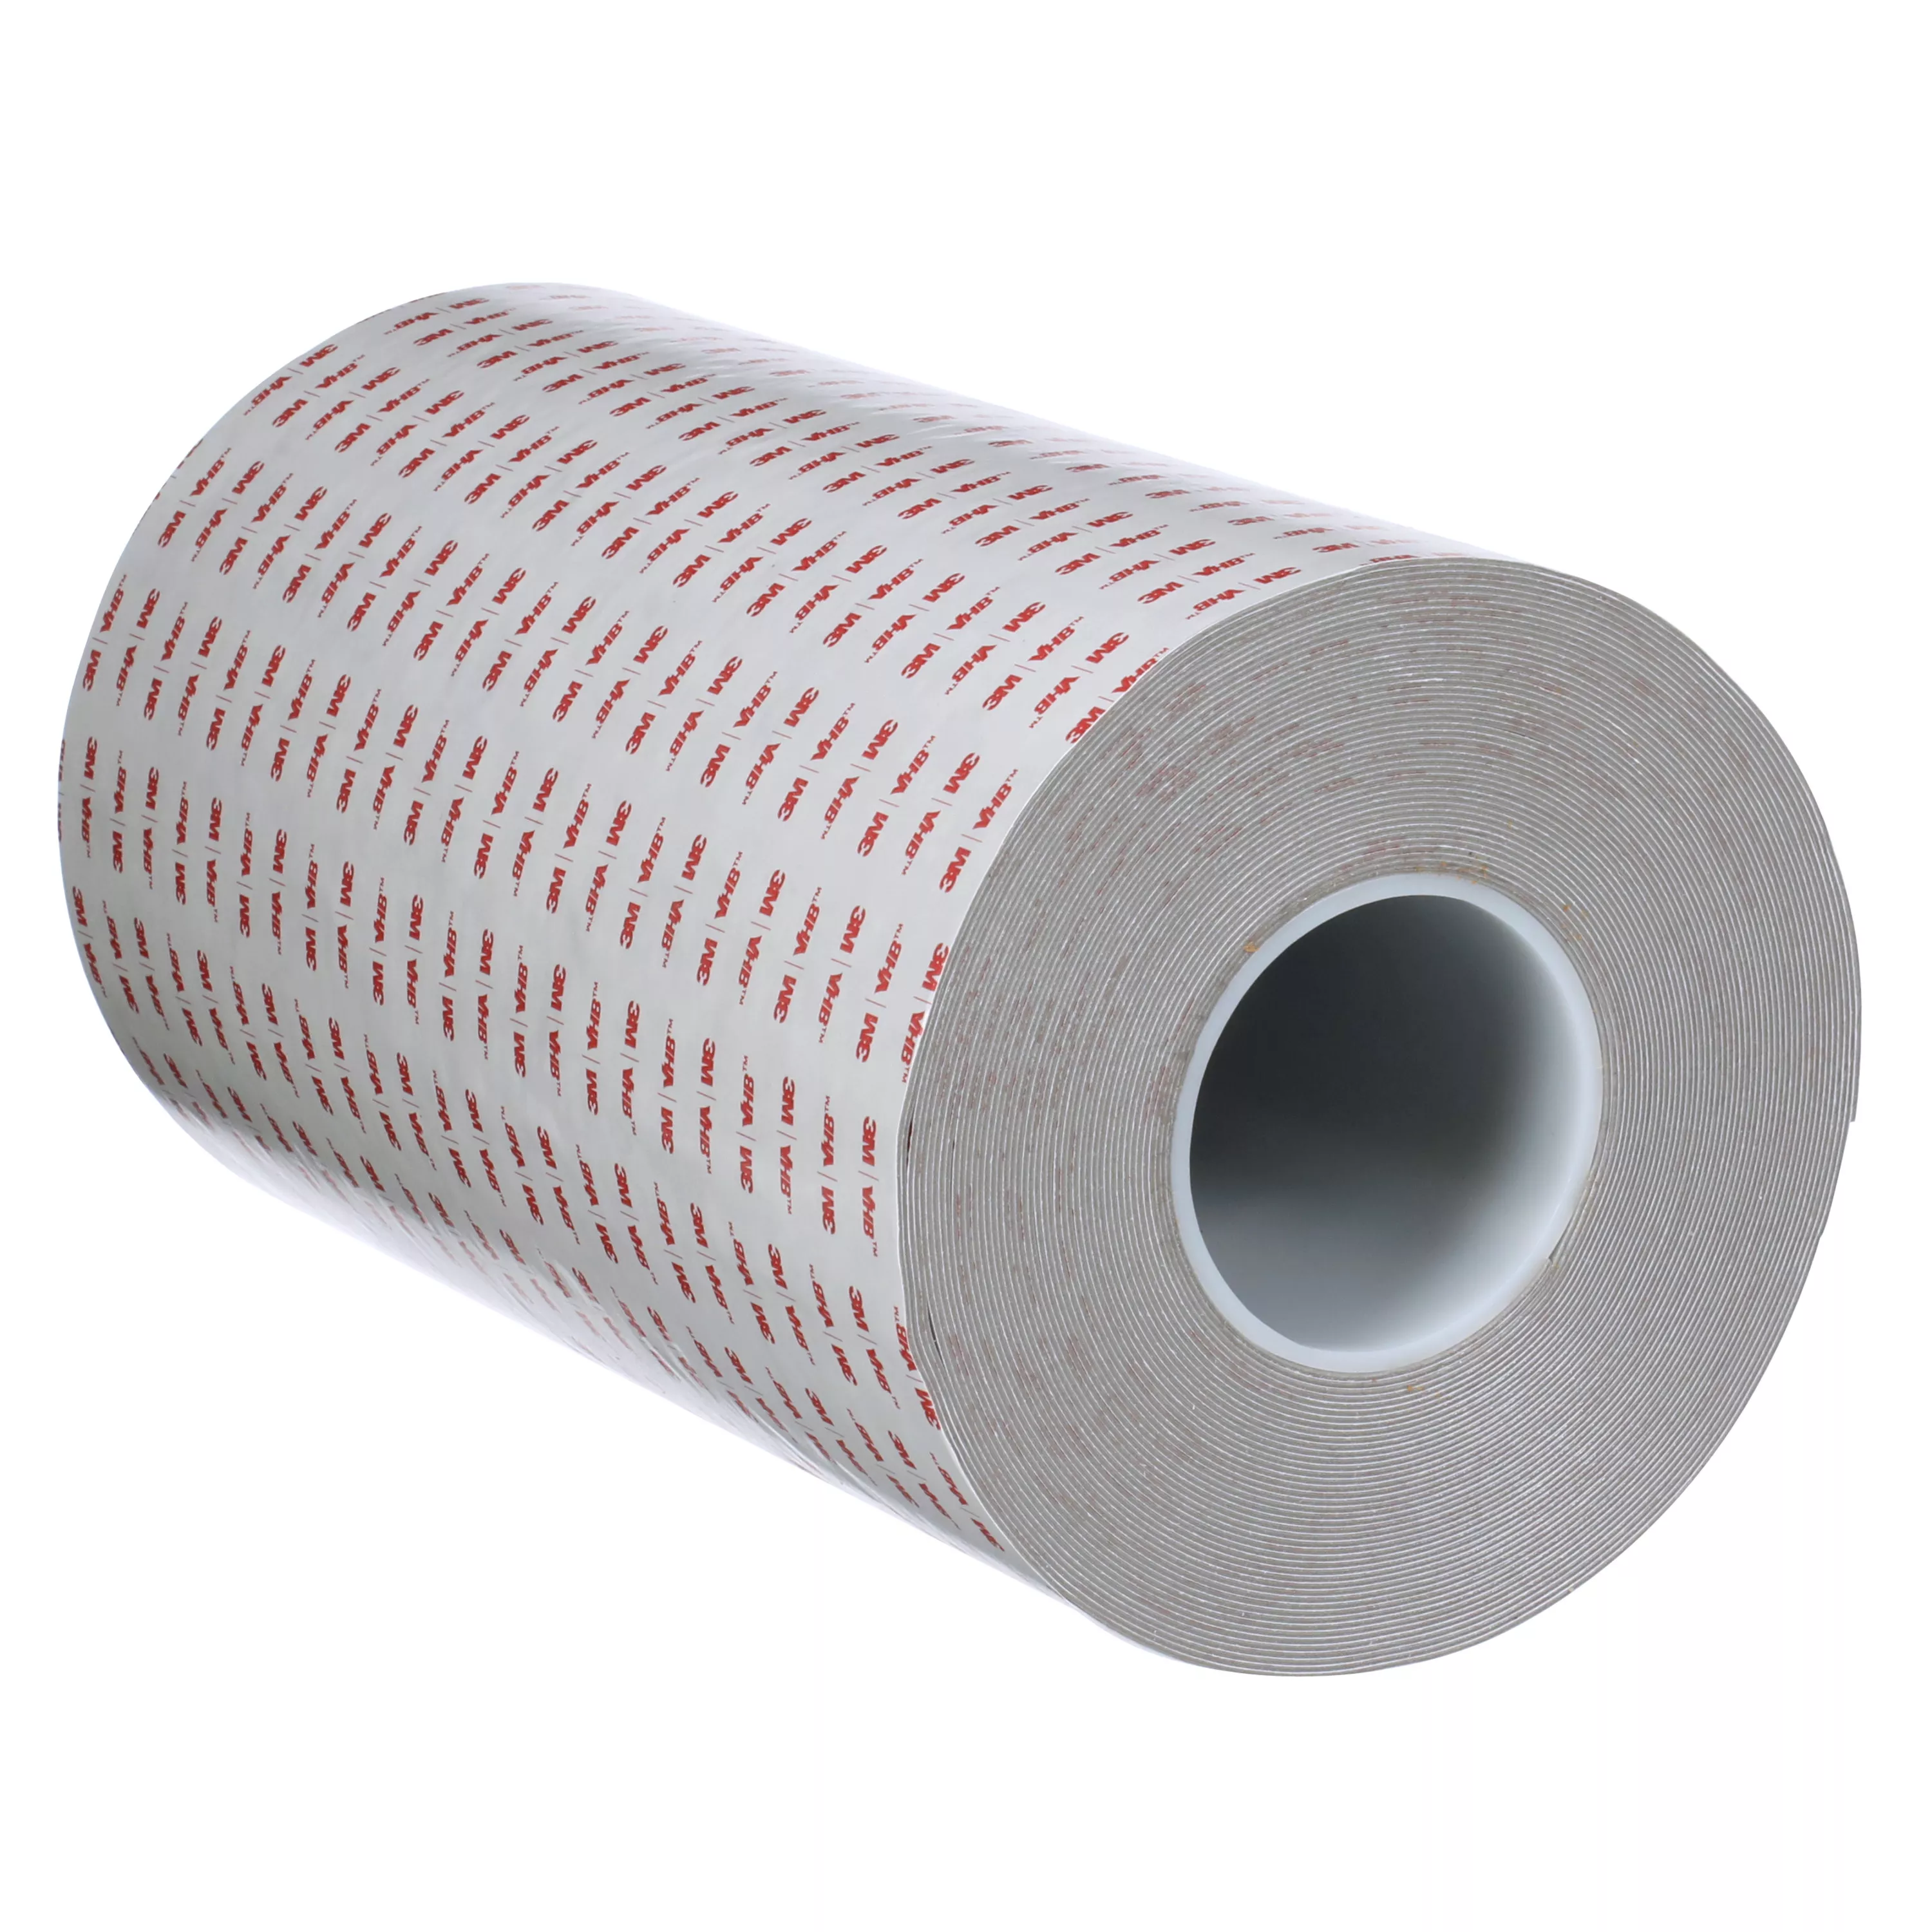 Product Number RP+060GP | 3M™ VHB™ Tape RP+060GP